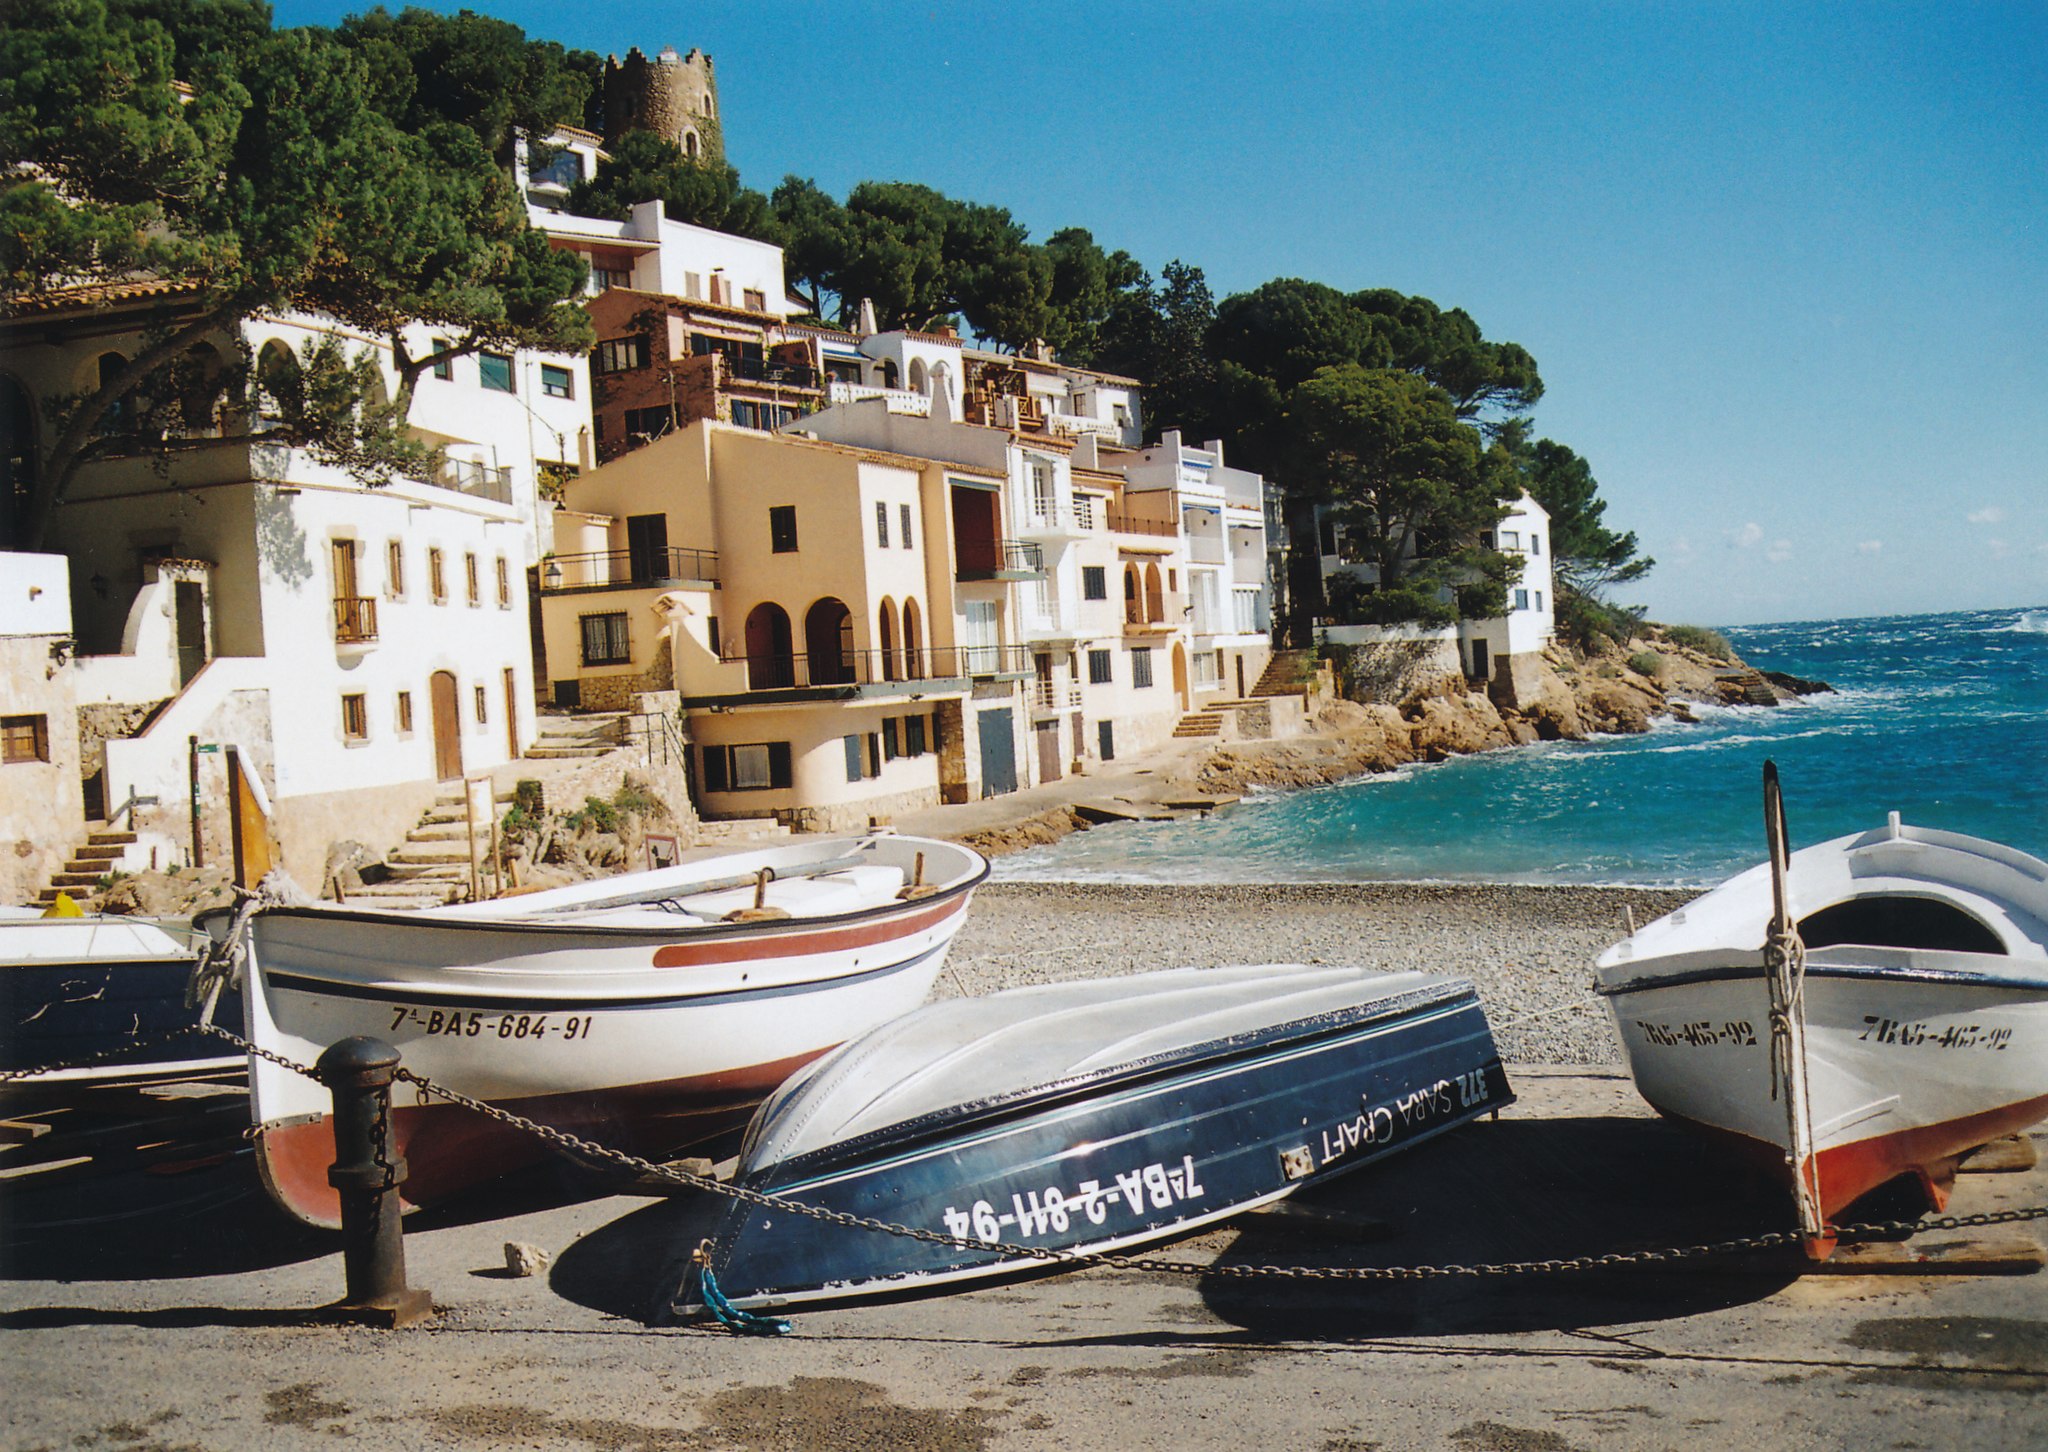 Must-sees of the Costa Brava